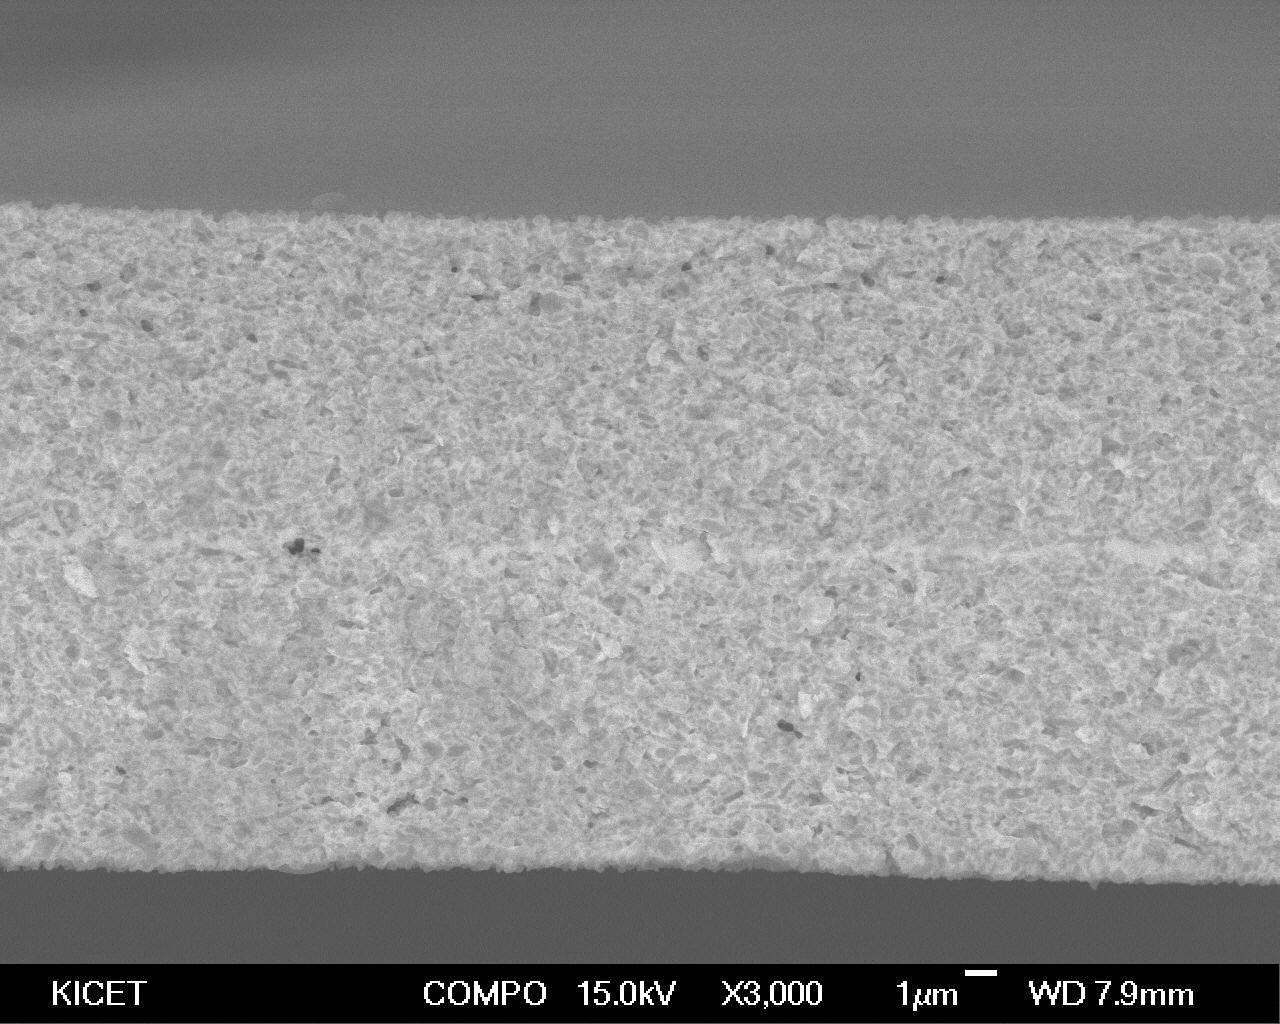 Microstructure of single bundle substrate using Pb-B-Si glass.